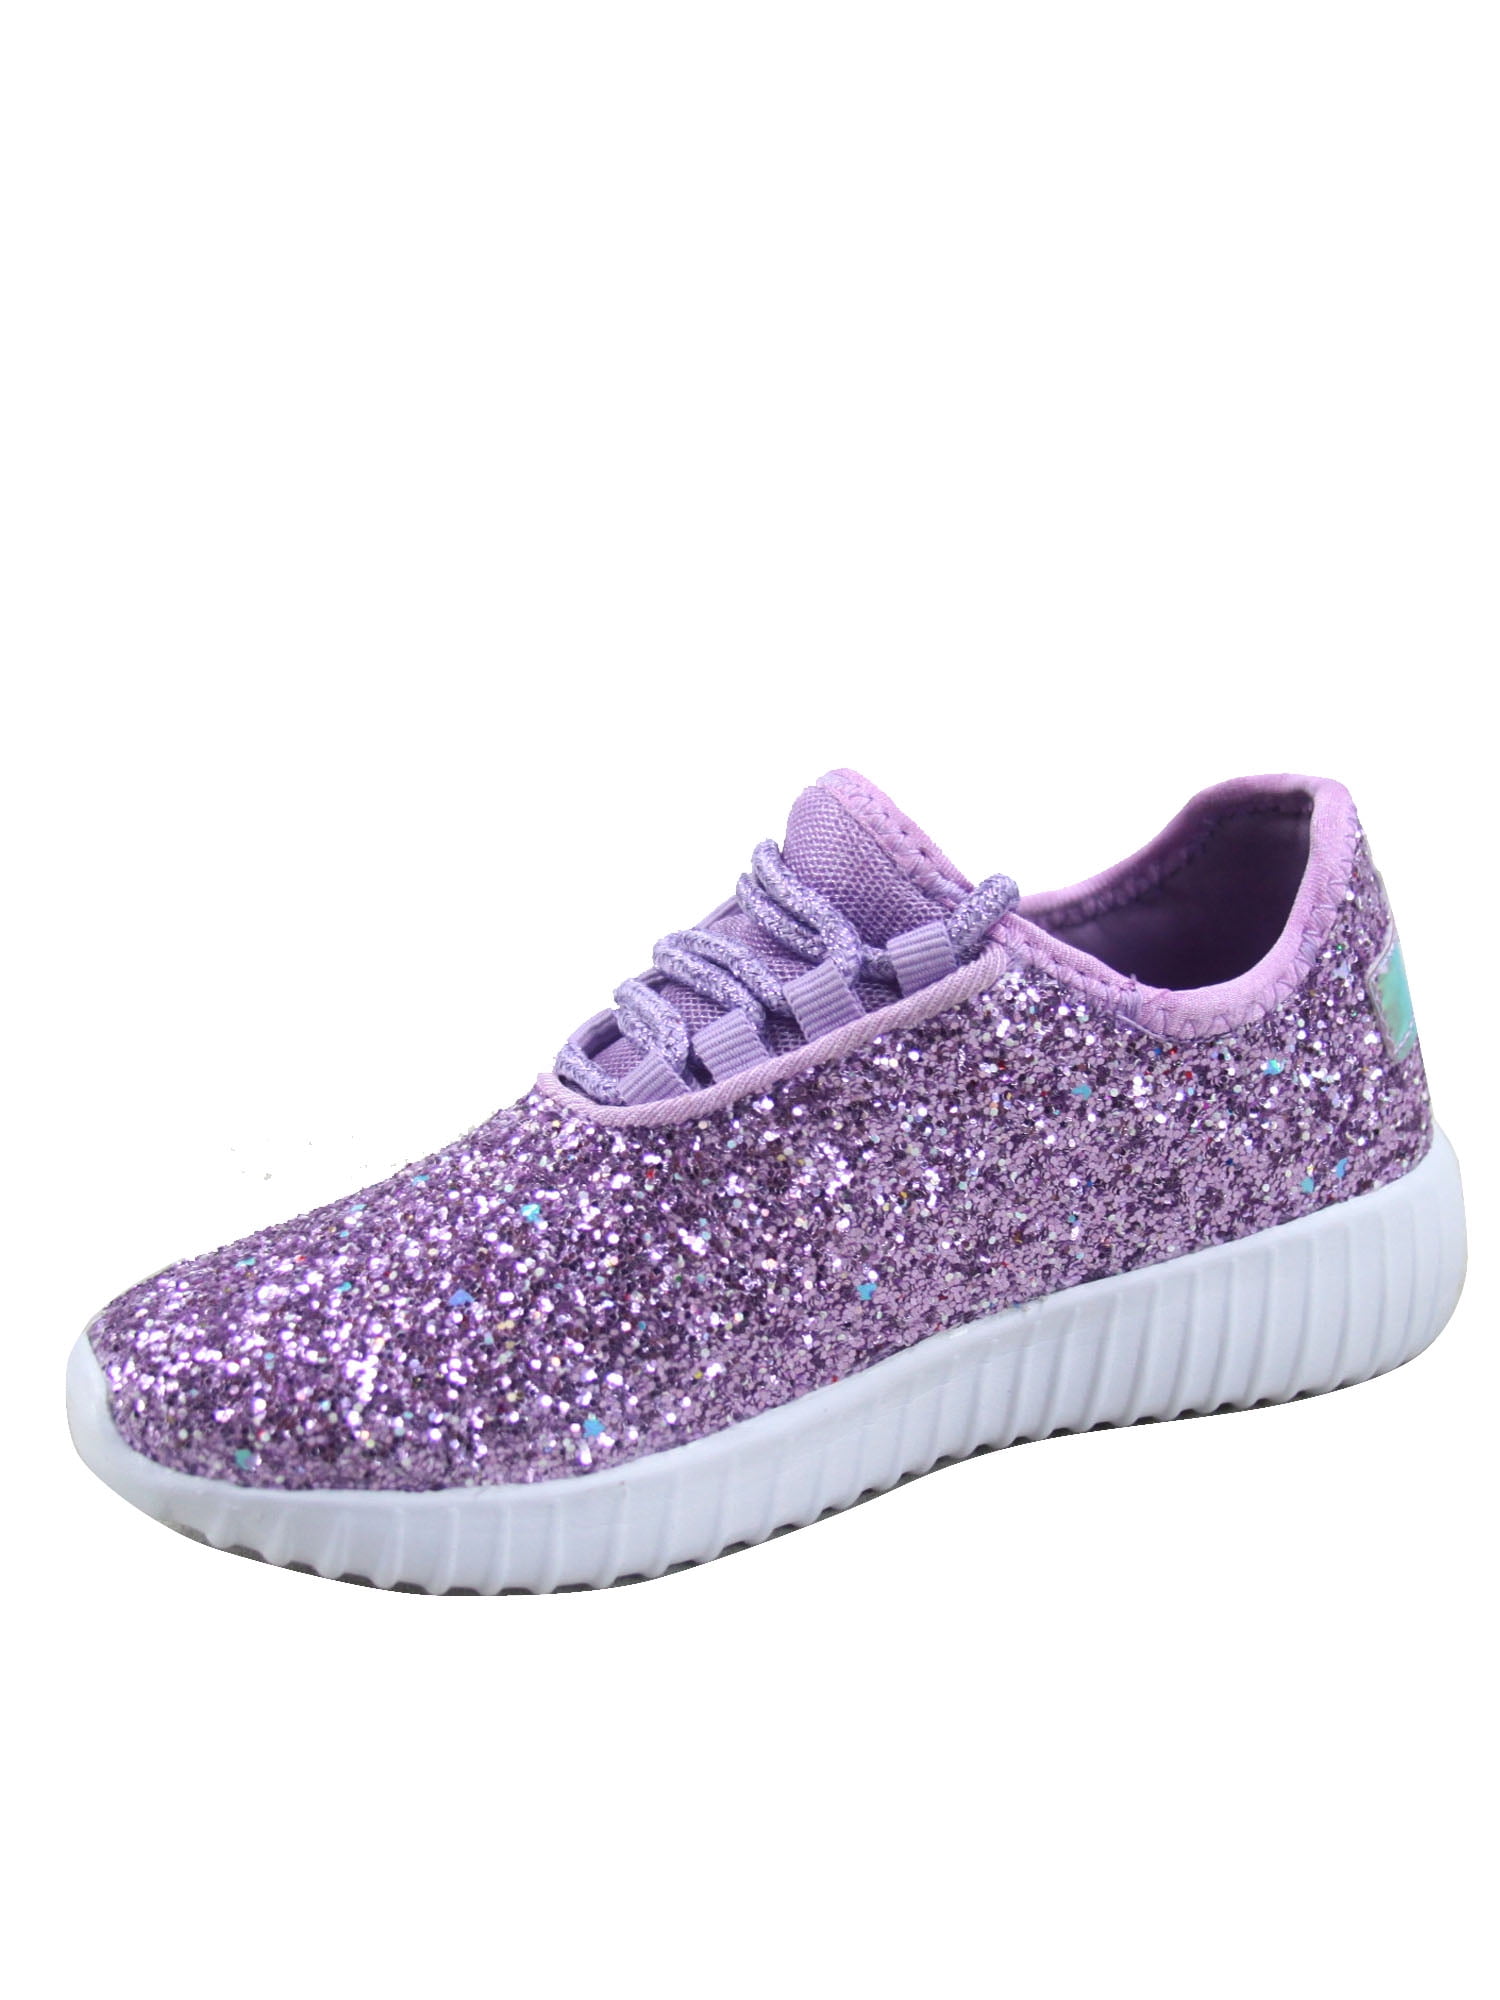 Glitter Fashion Sneakers Shoes Kids Girls Sports Gold Silver Casual Flats 2020 